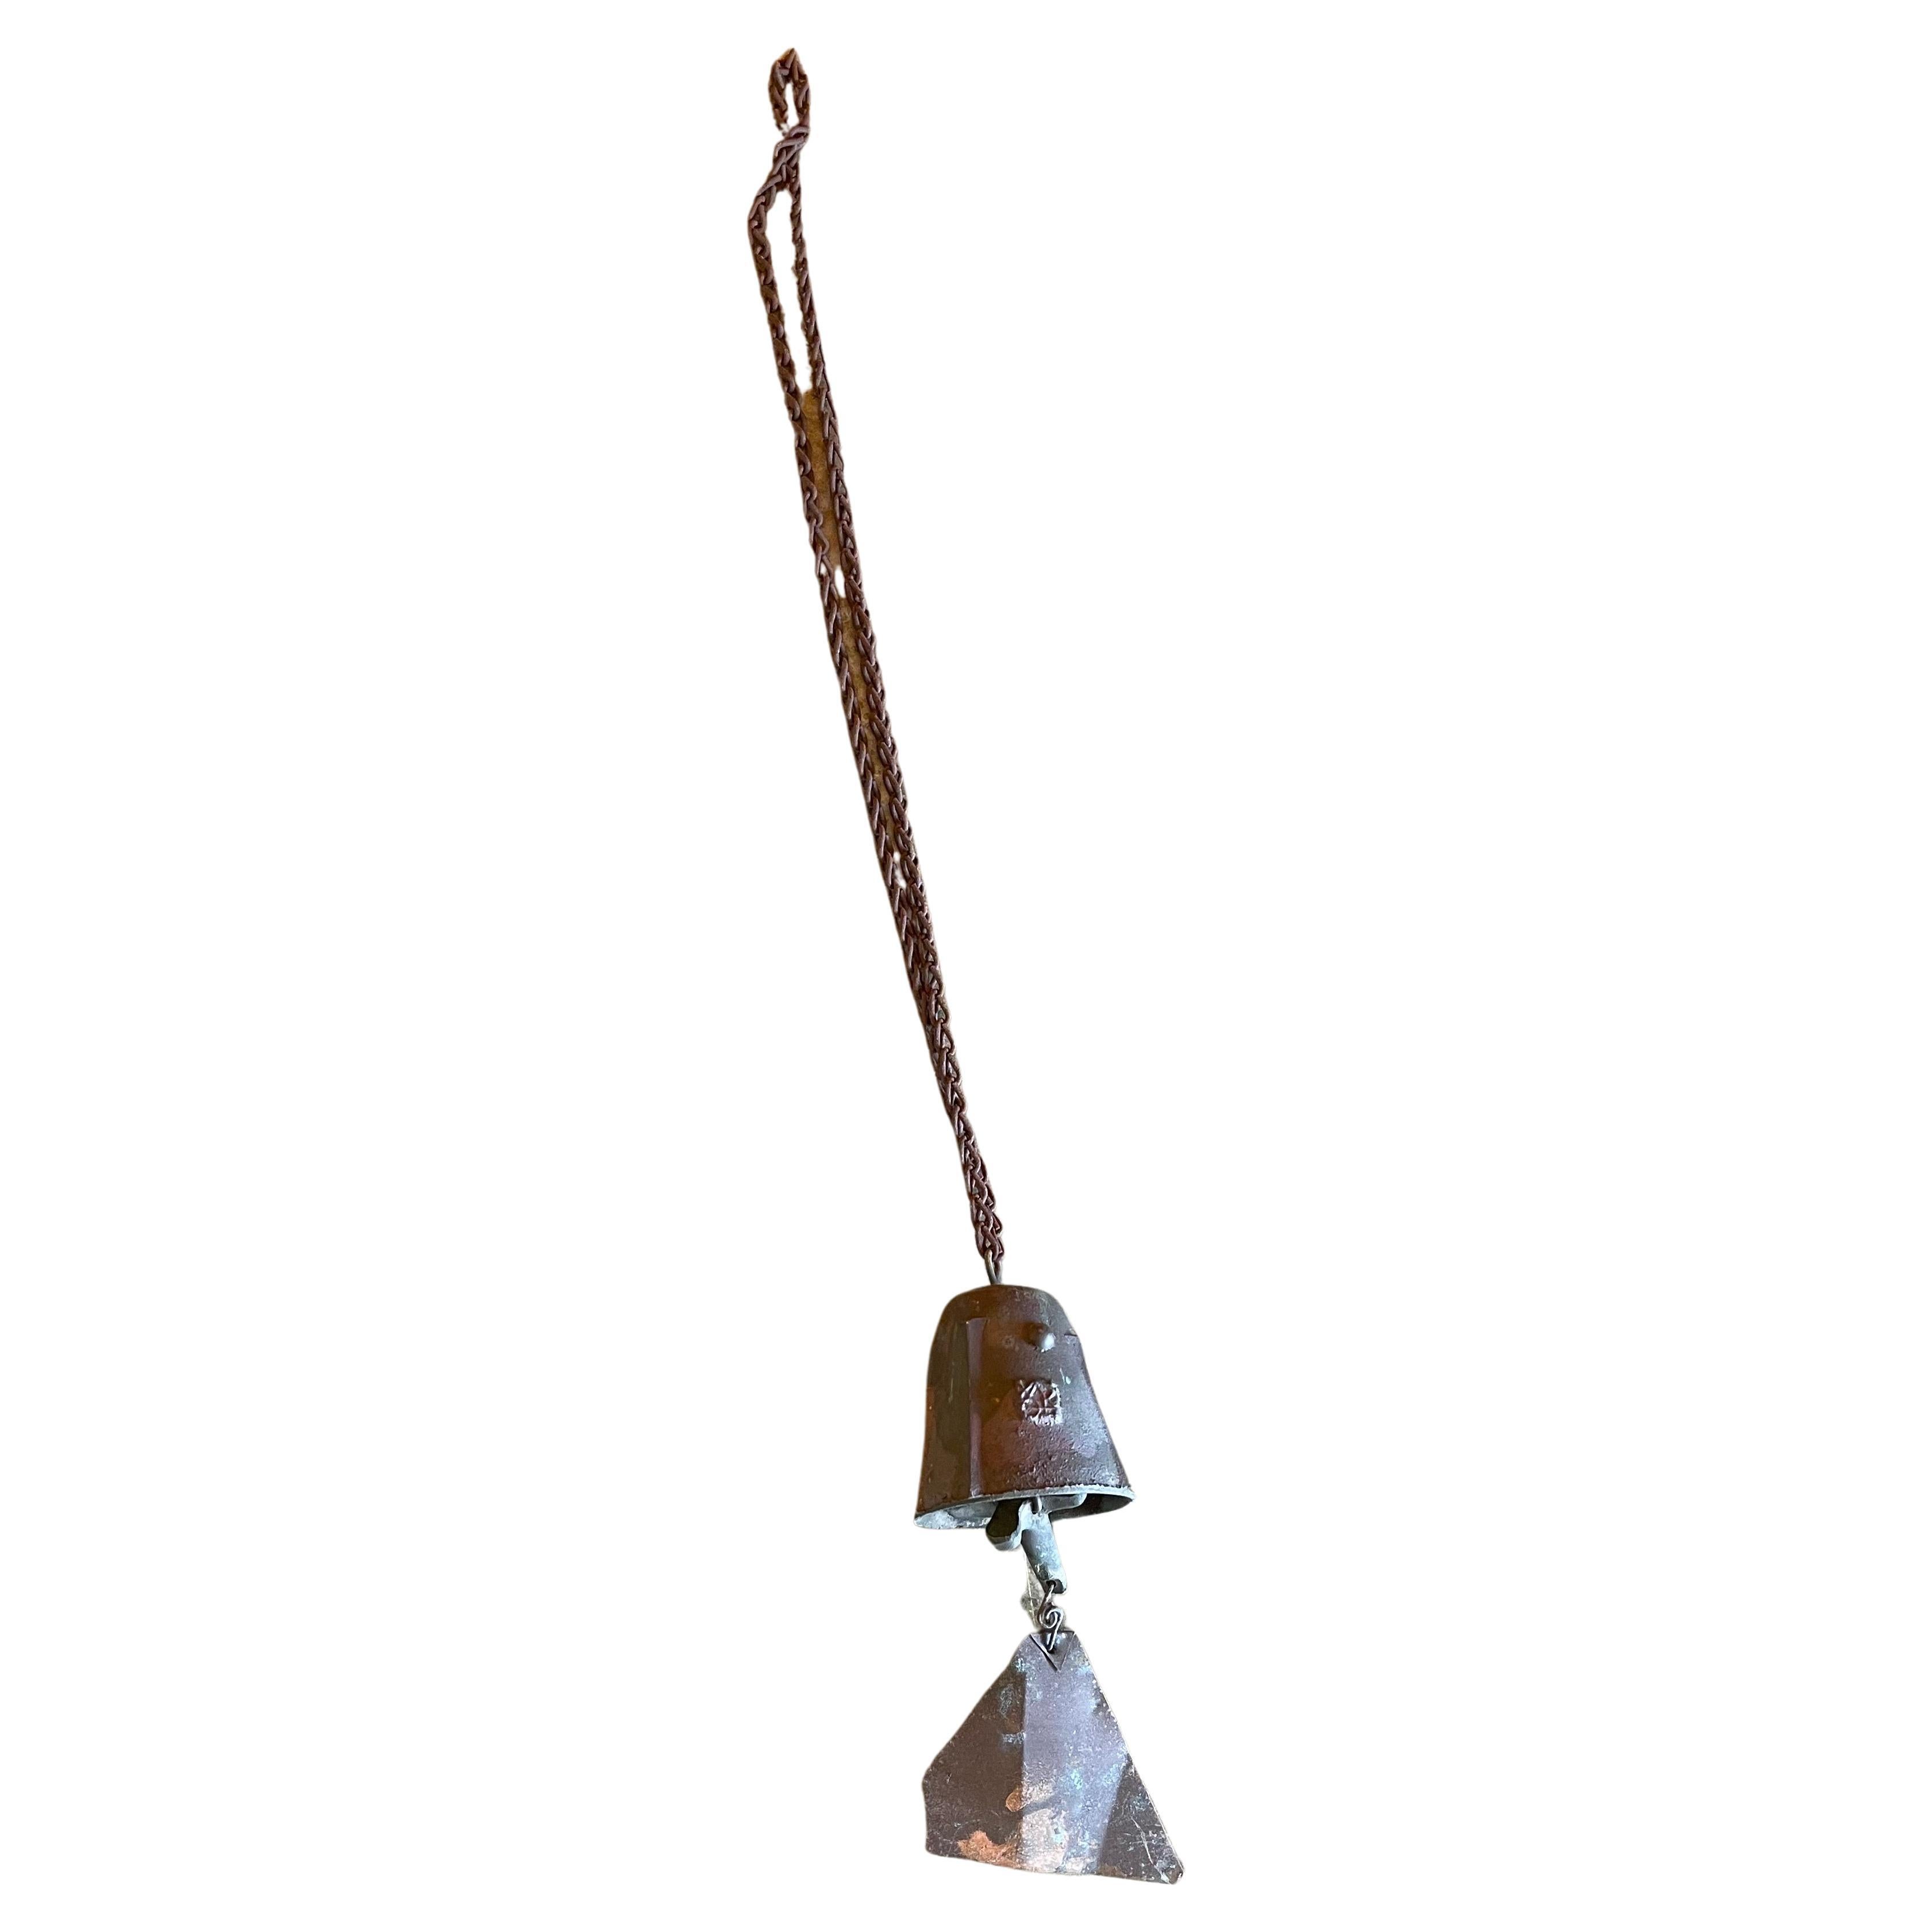 Small Bronze Wind Chime / Bell by Paolo Soleri for Cosanti 4